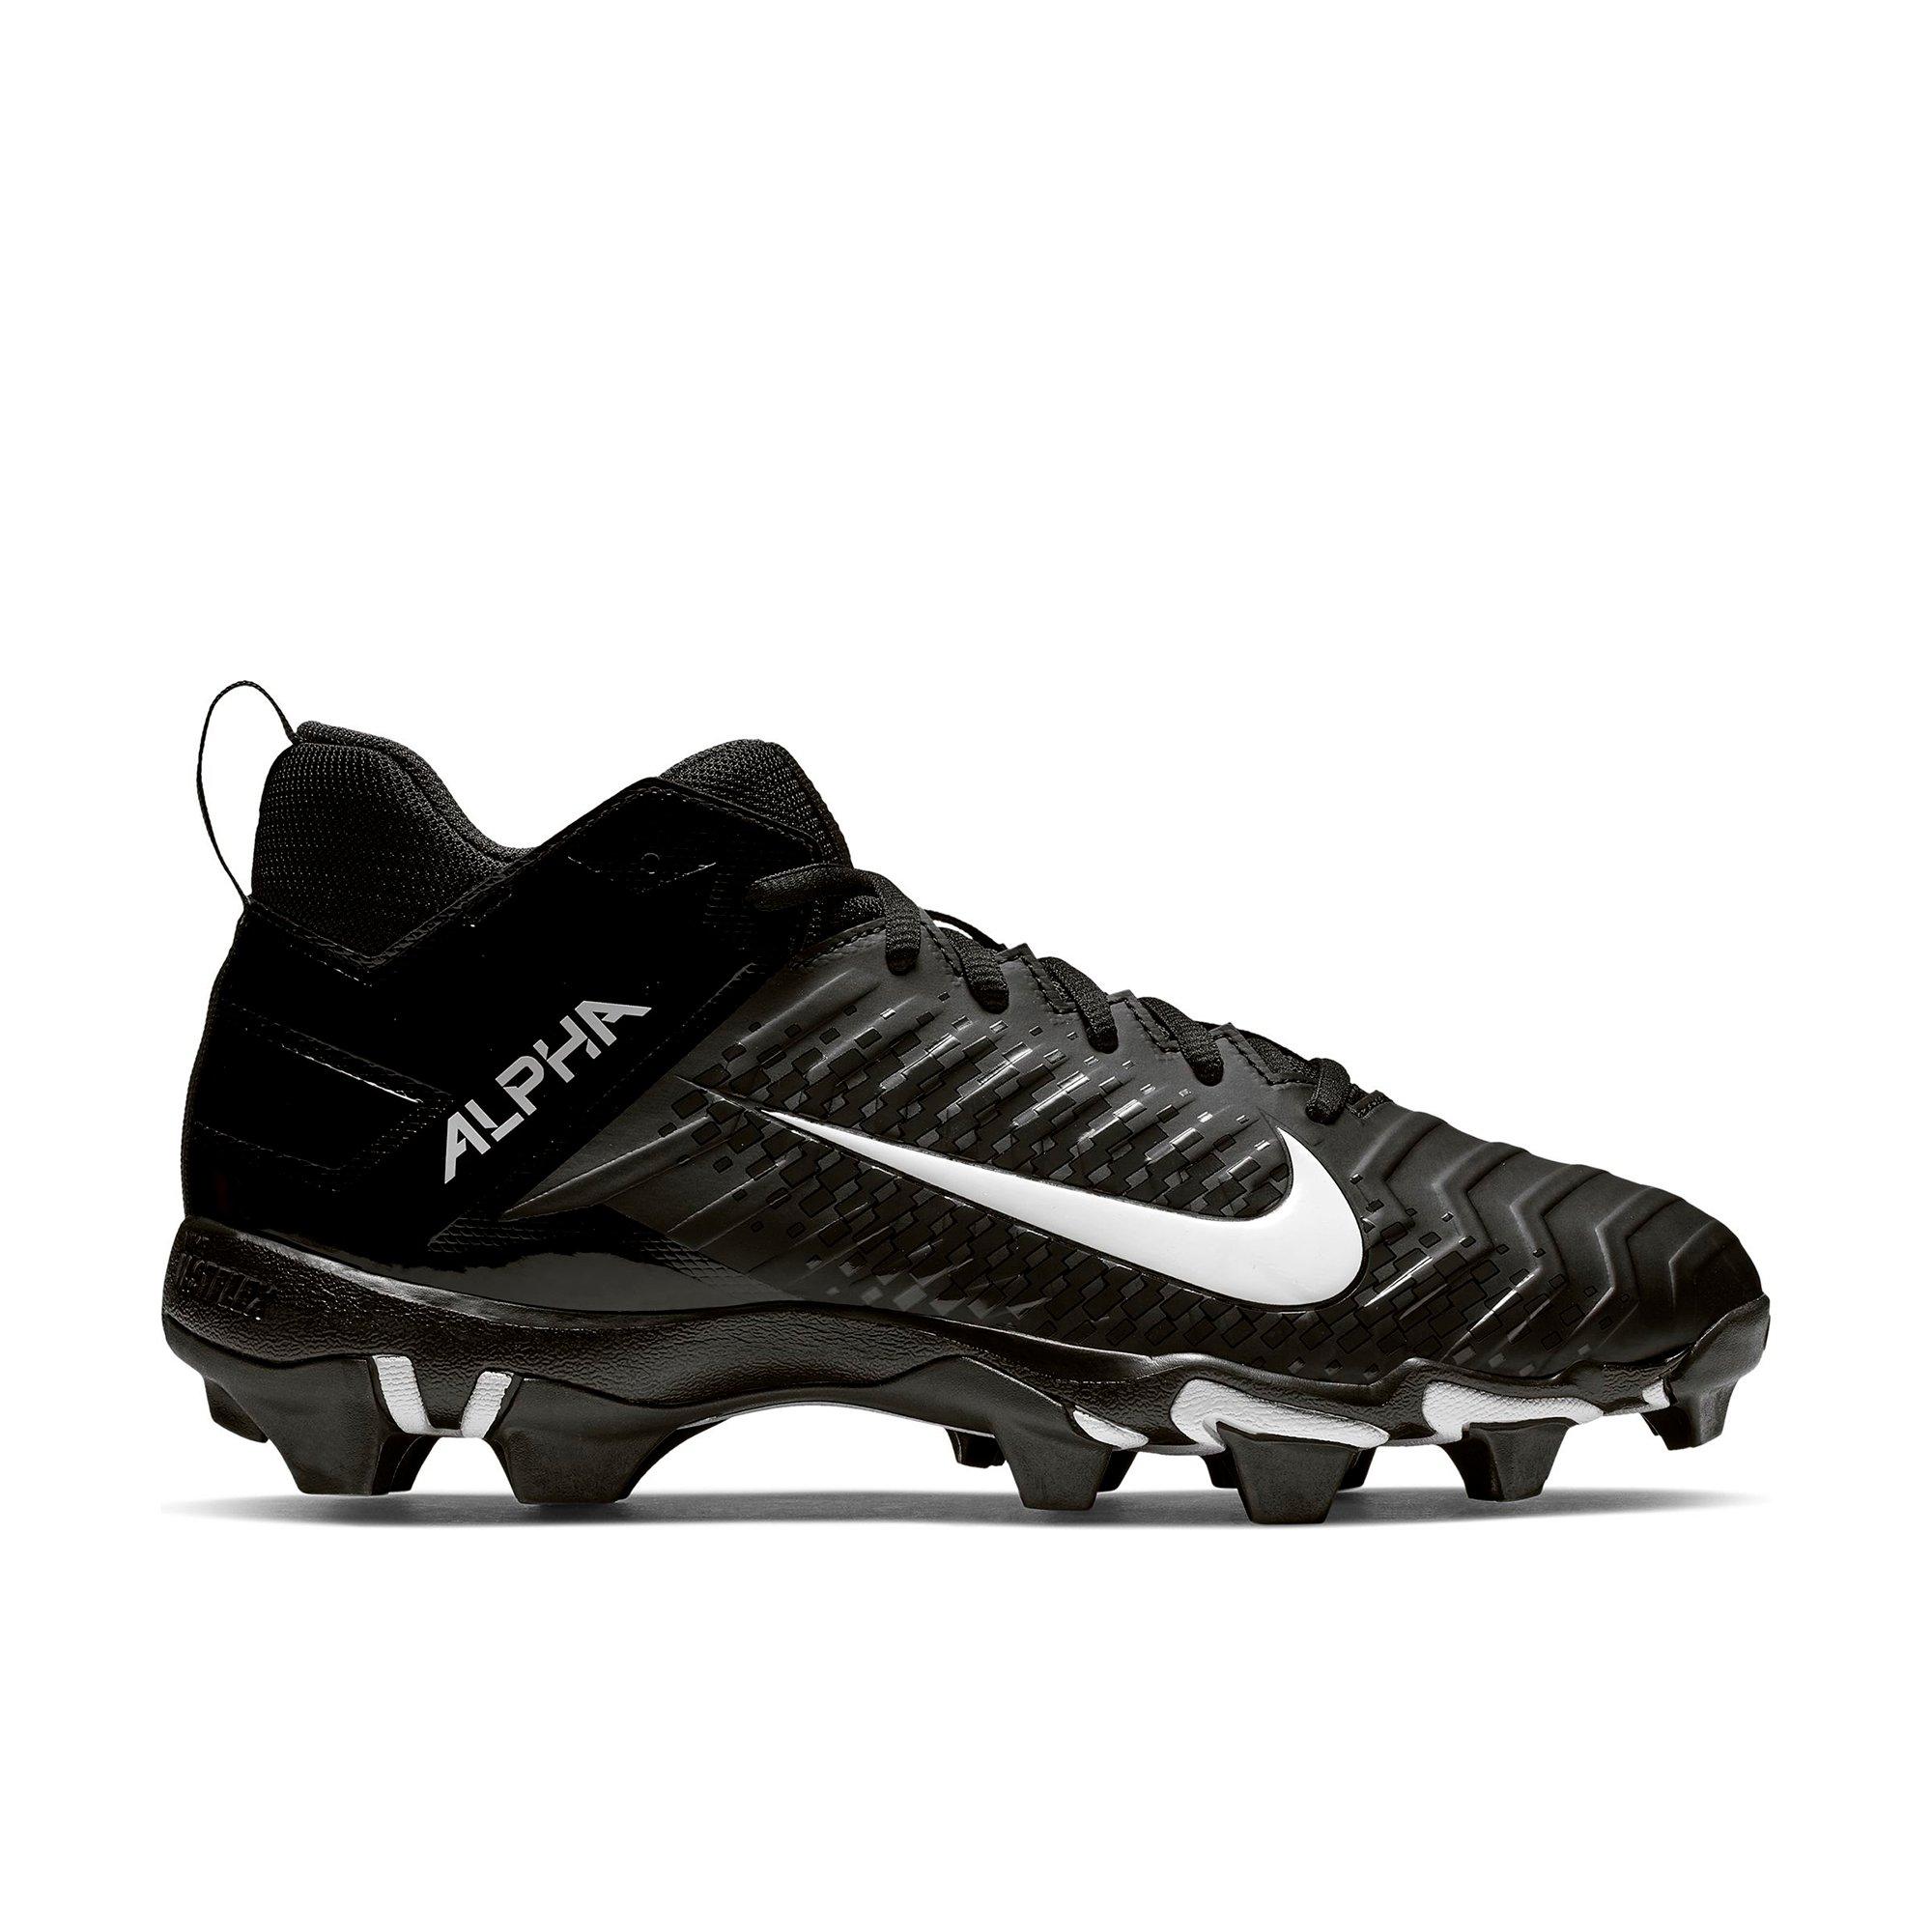 size 7 wide football cleats